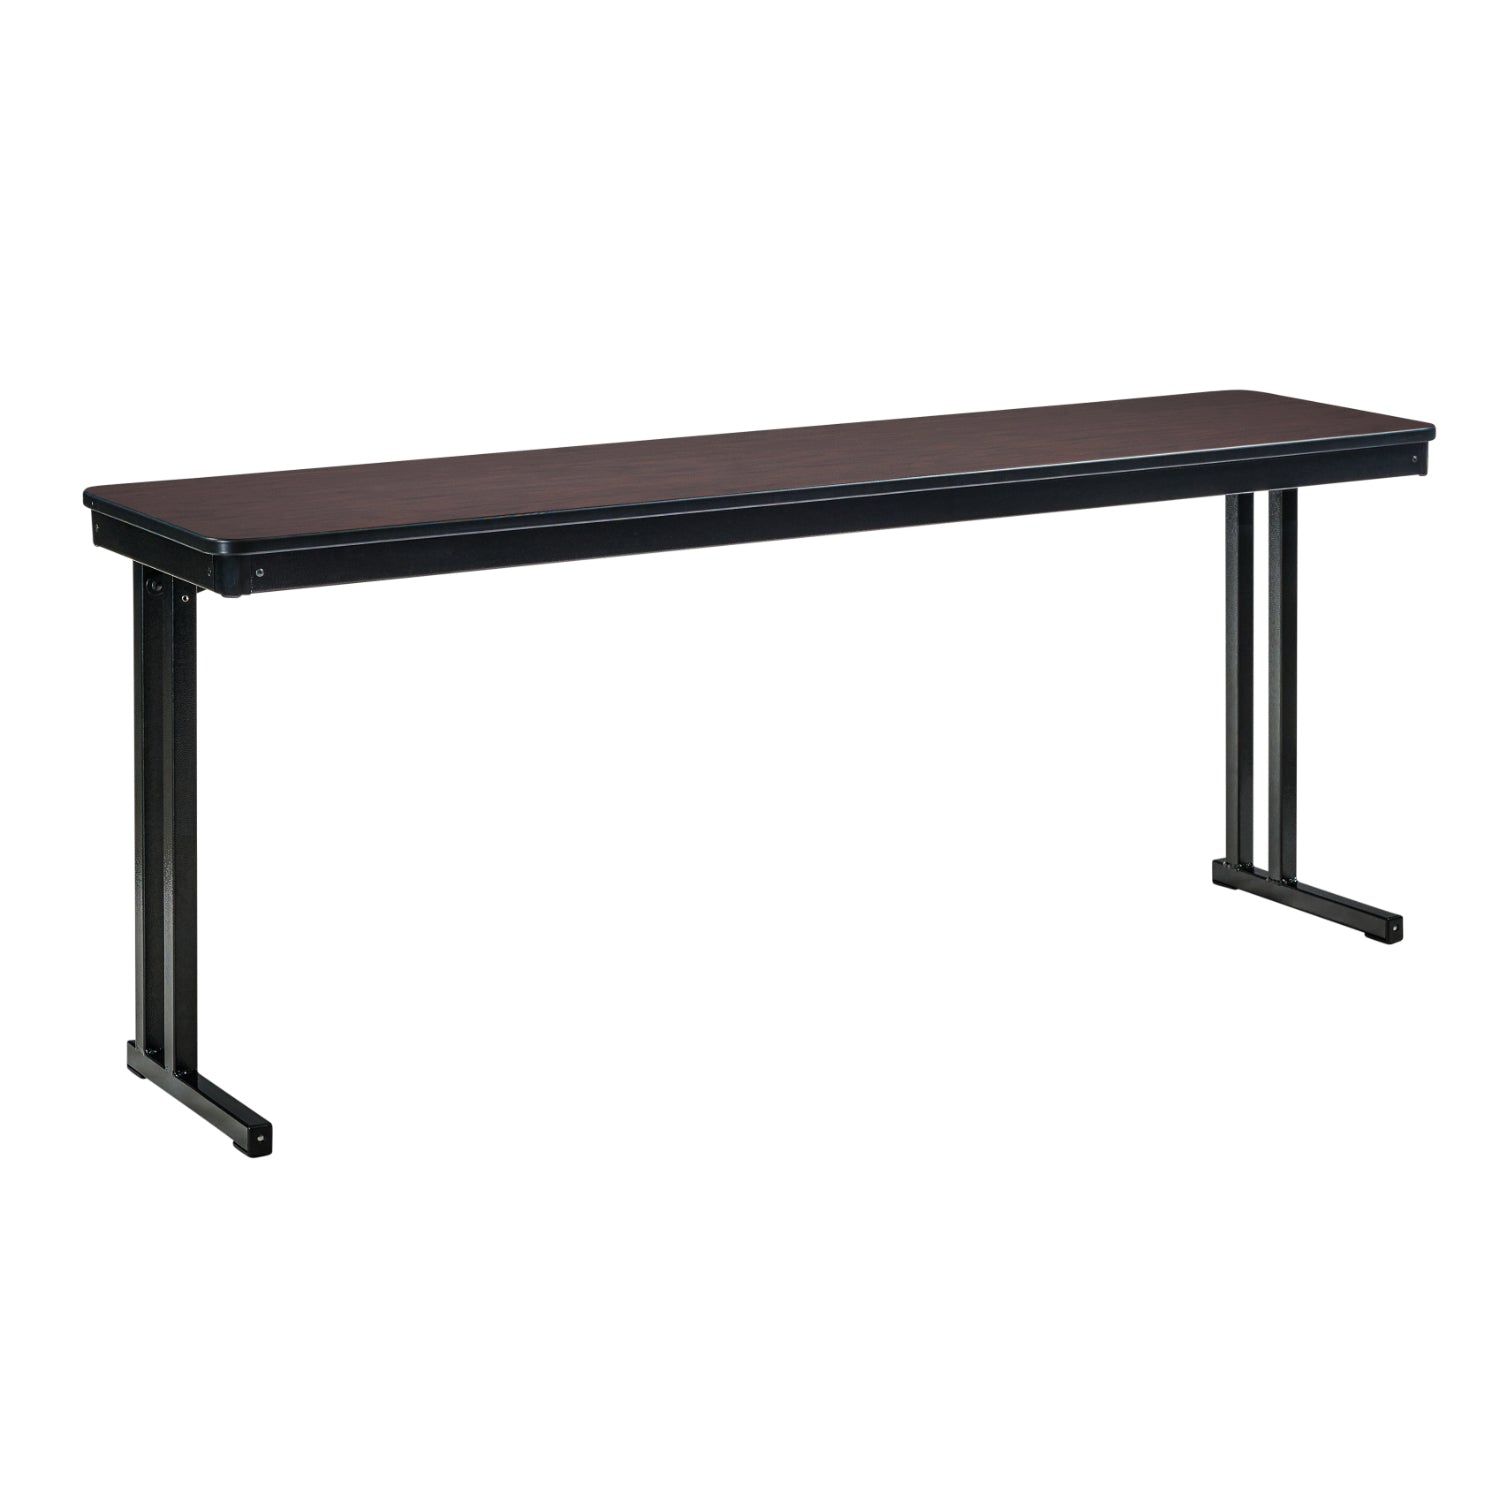 Max Seating Folding Training and Seminar Table with Cantilever Legs, 18" x 72", High Pressure Laminate Top with Particleboard Core/PVC Edge Banding